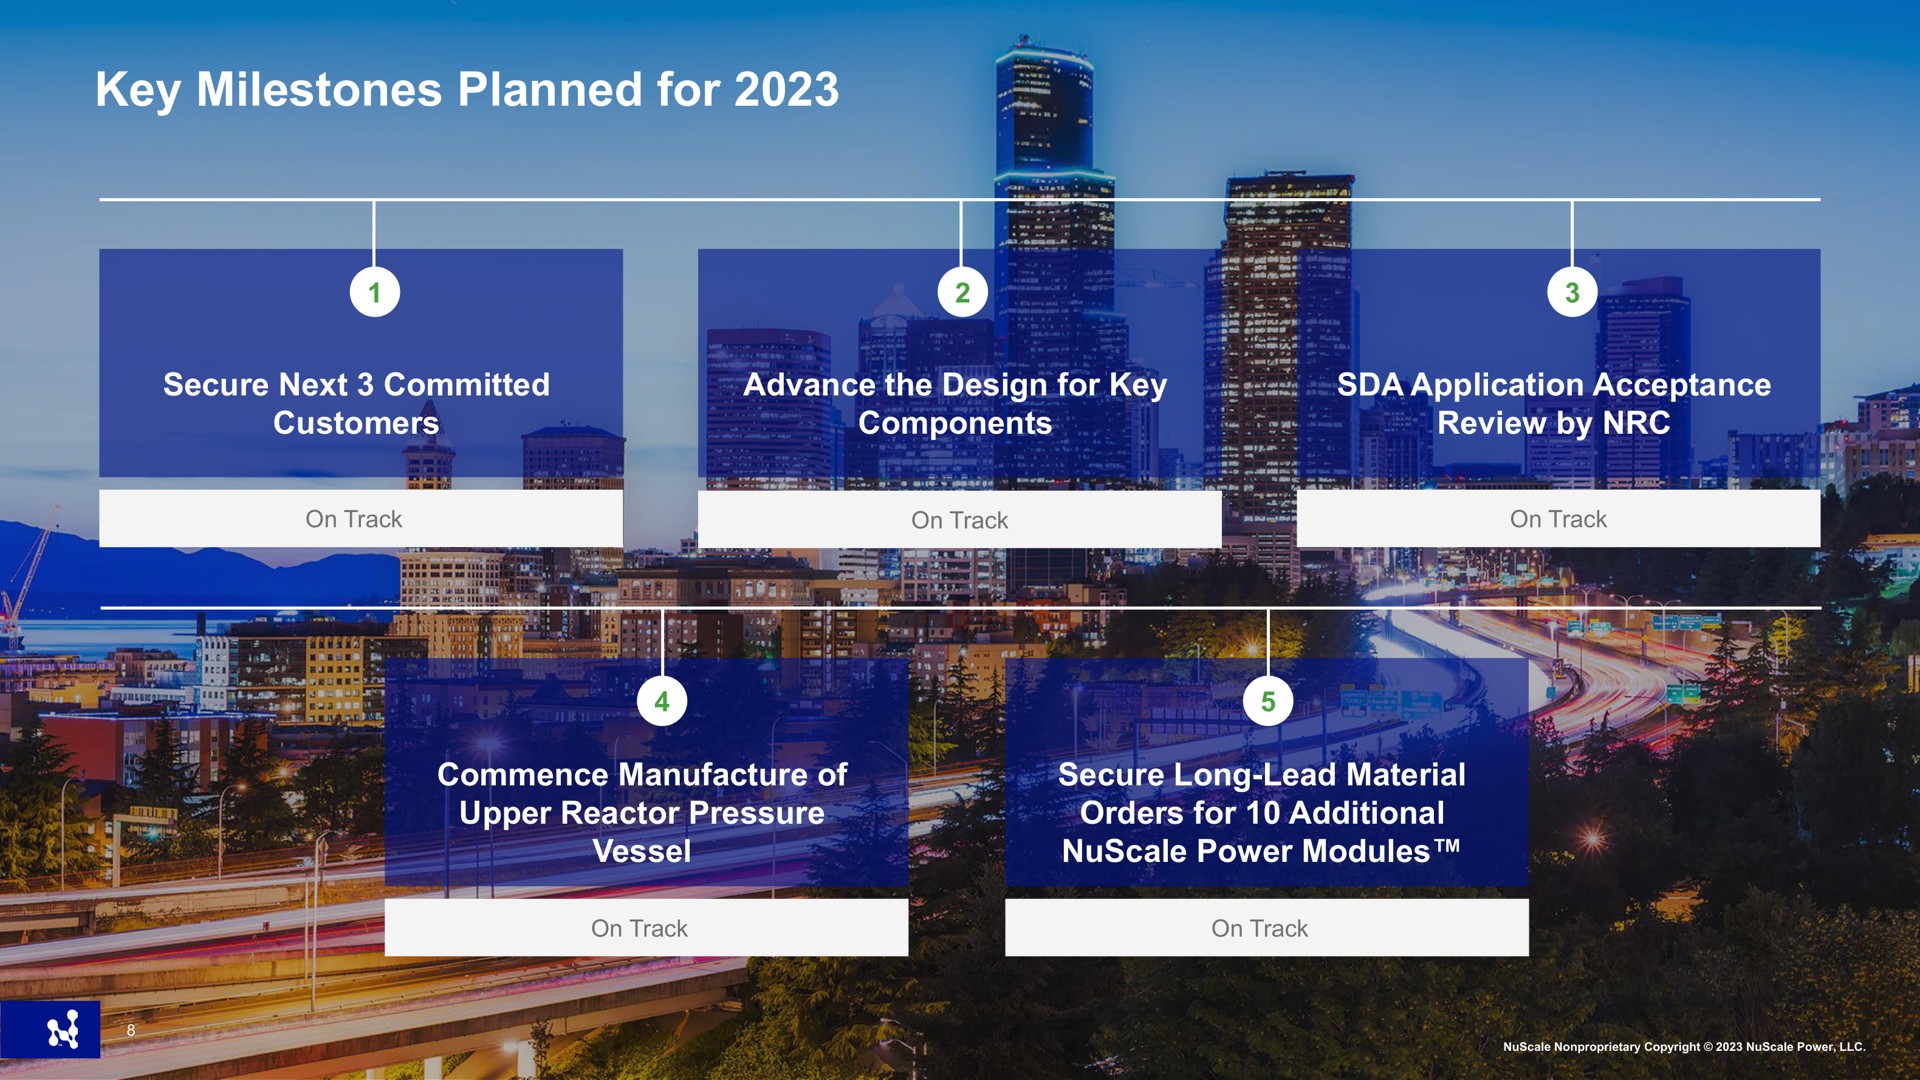 key milestones planned for advance the design components pee tote a at commence manufacture of upper reactor pressure orders additional a i | Nuscale